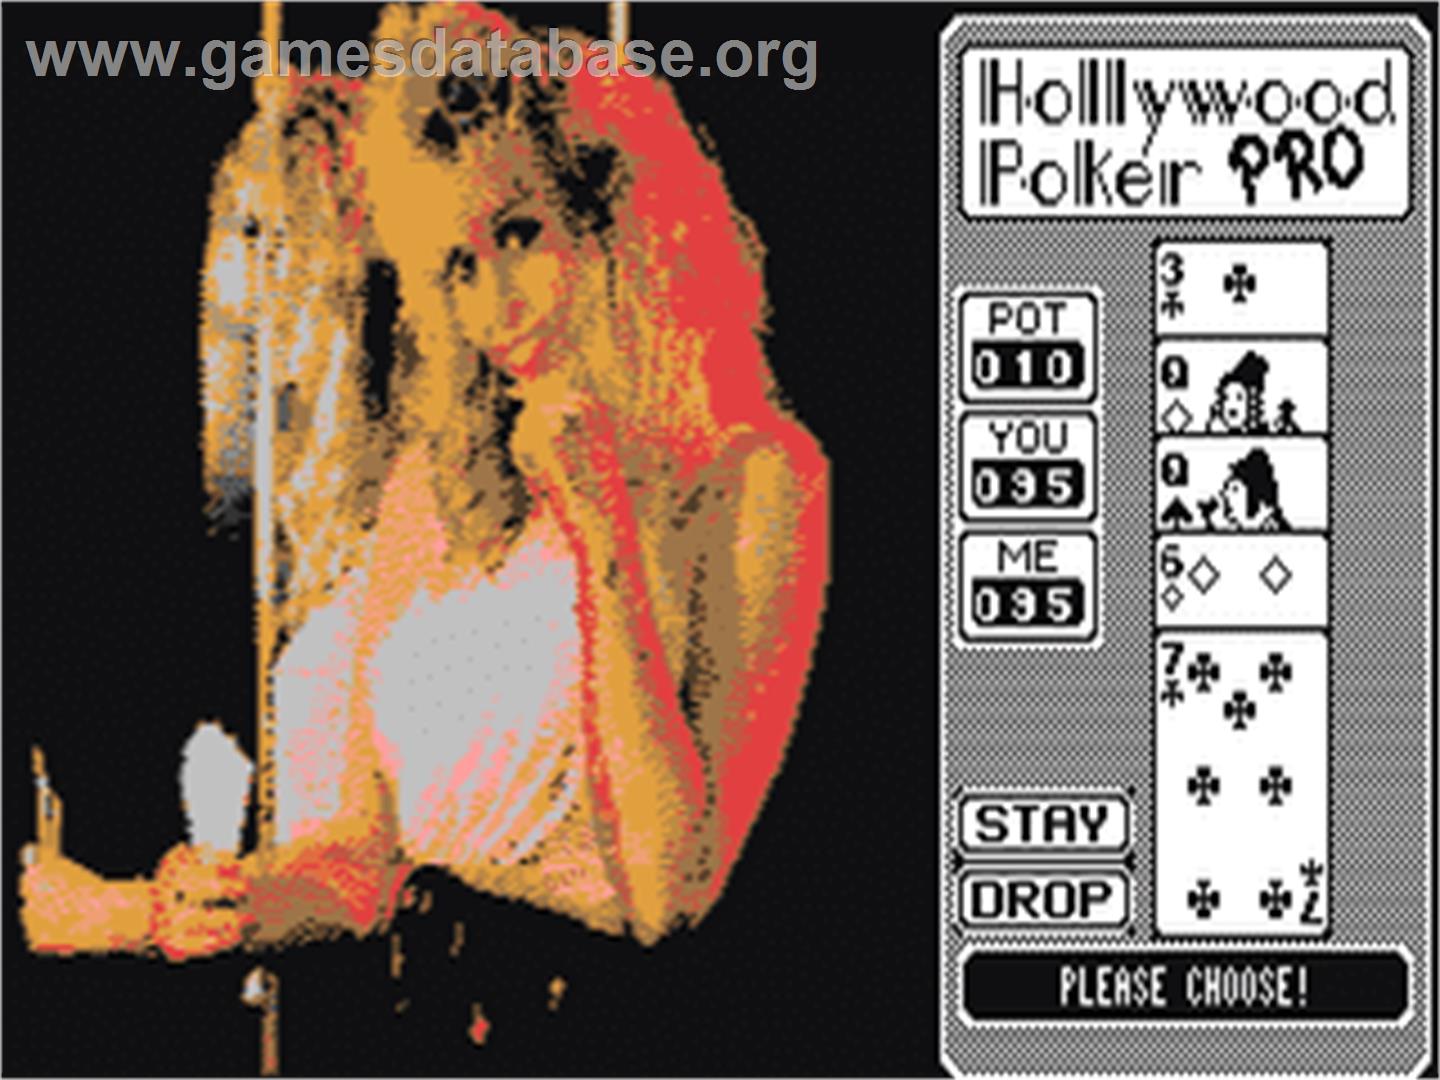 Hollywood Poker - Commodore 64 - Artwork - In Game